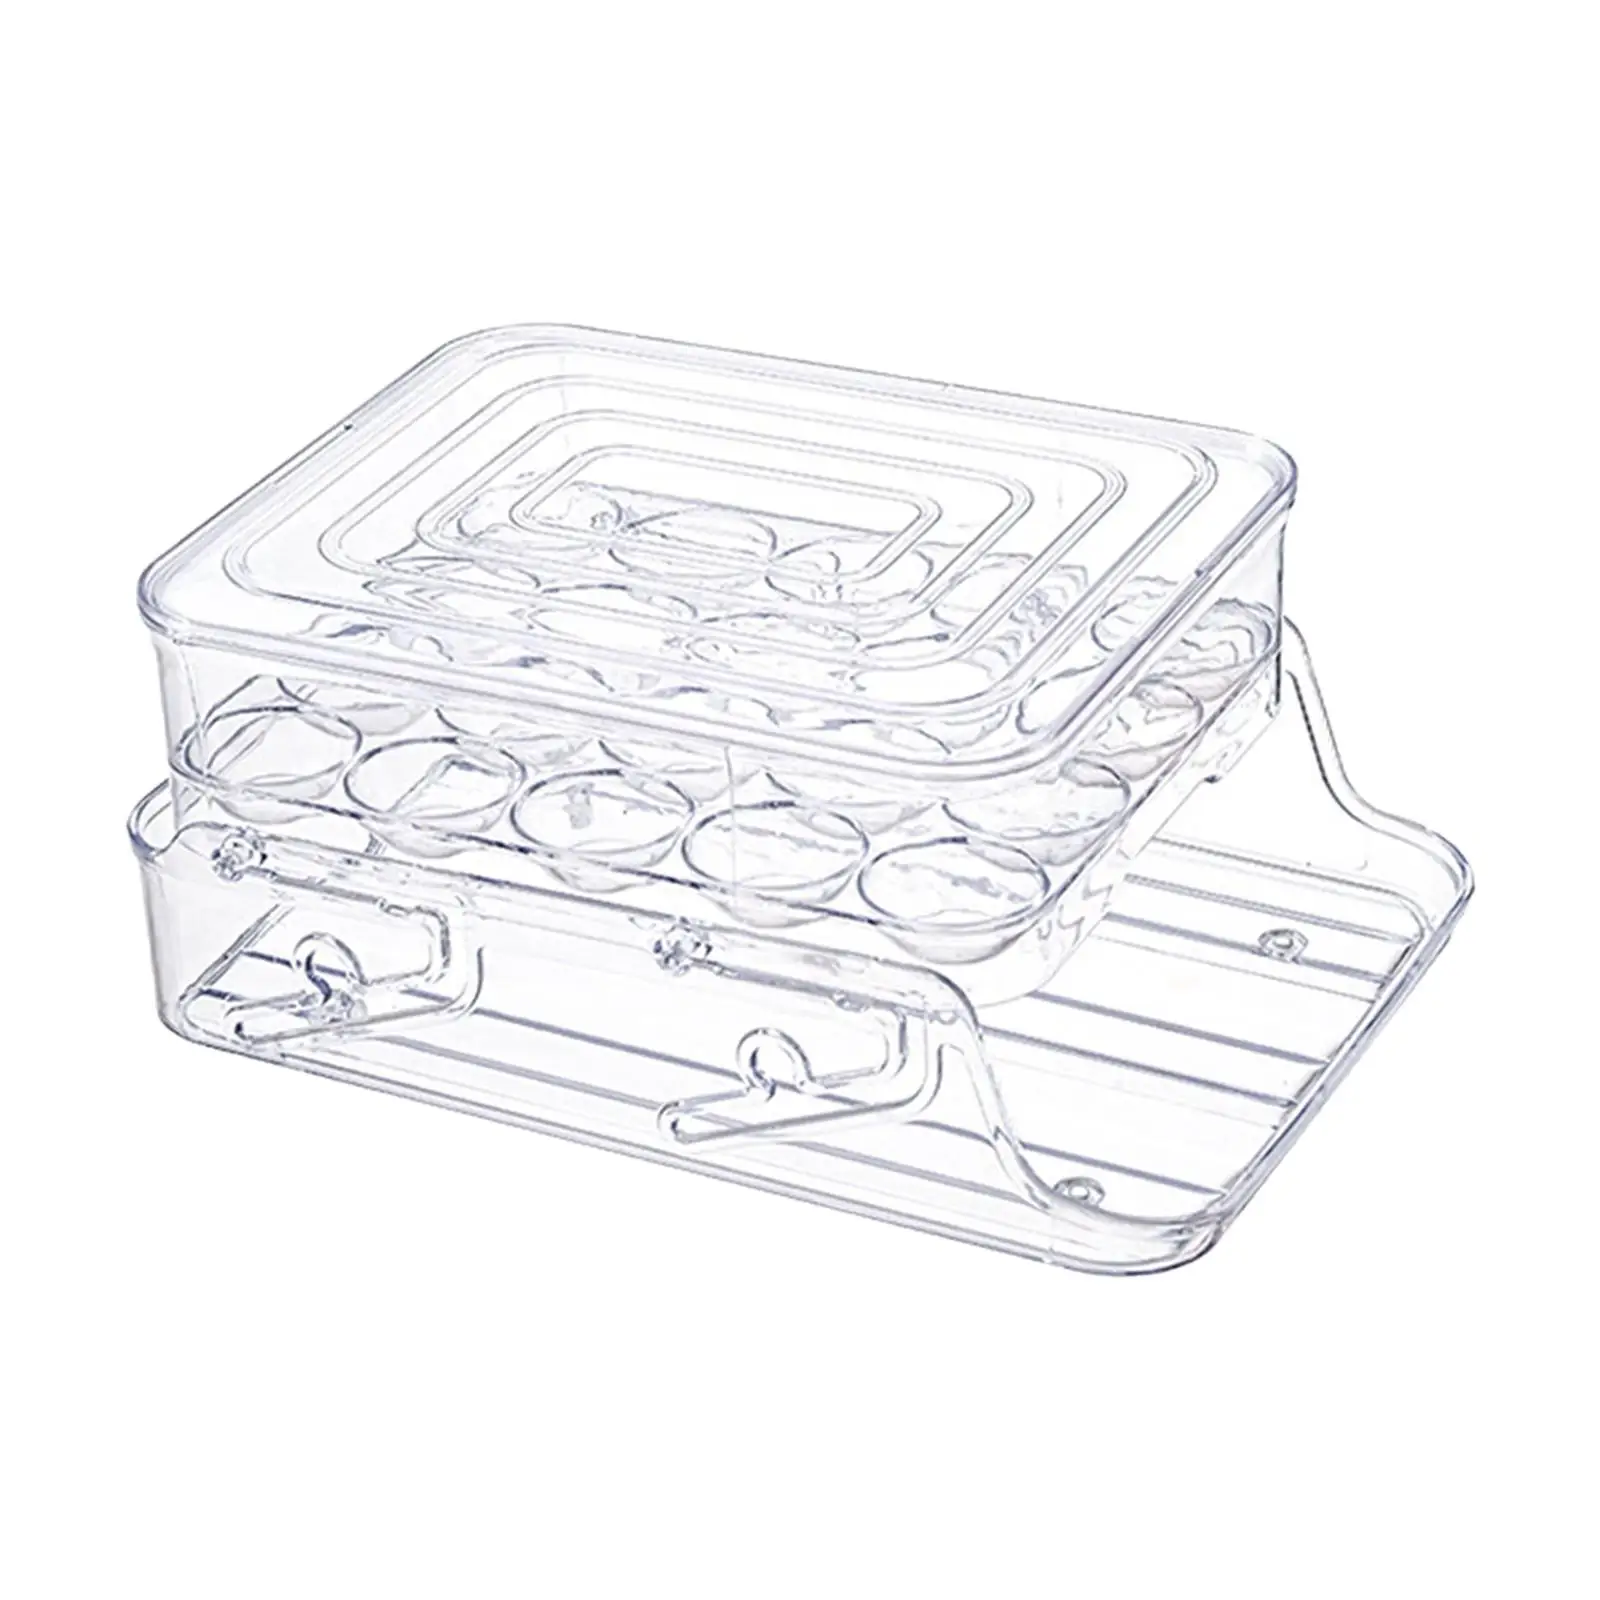 Egg Storage Container Organizer Bin with Lid Egg Container Household Stackable Egg Holder for Refrigerator for Storage Container